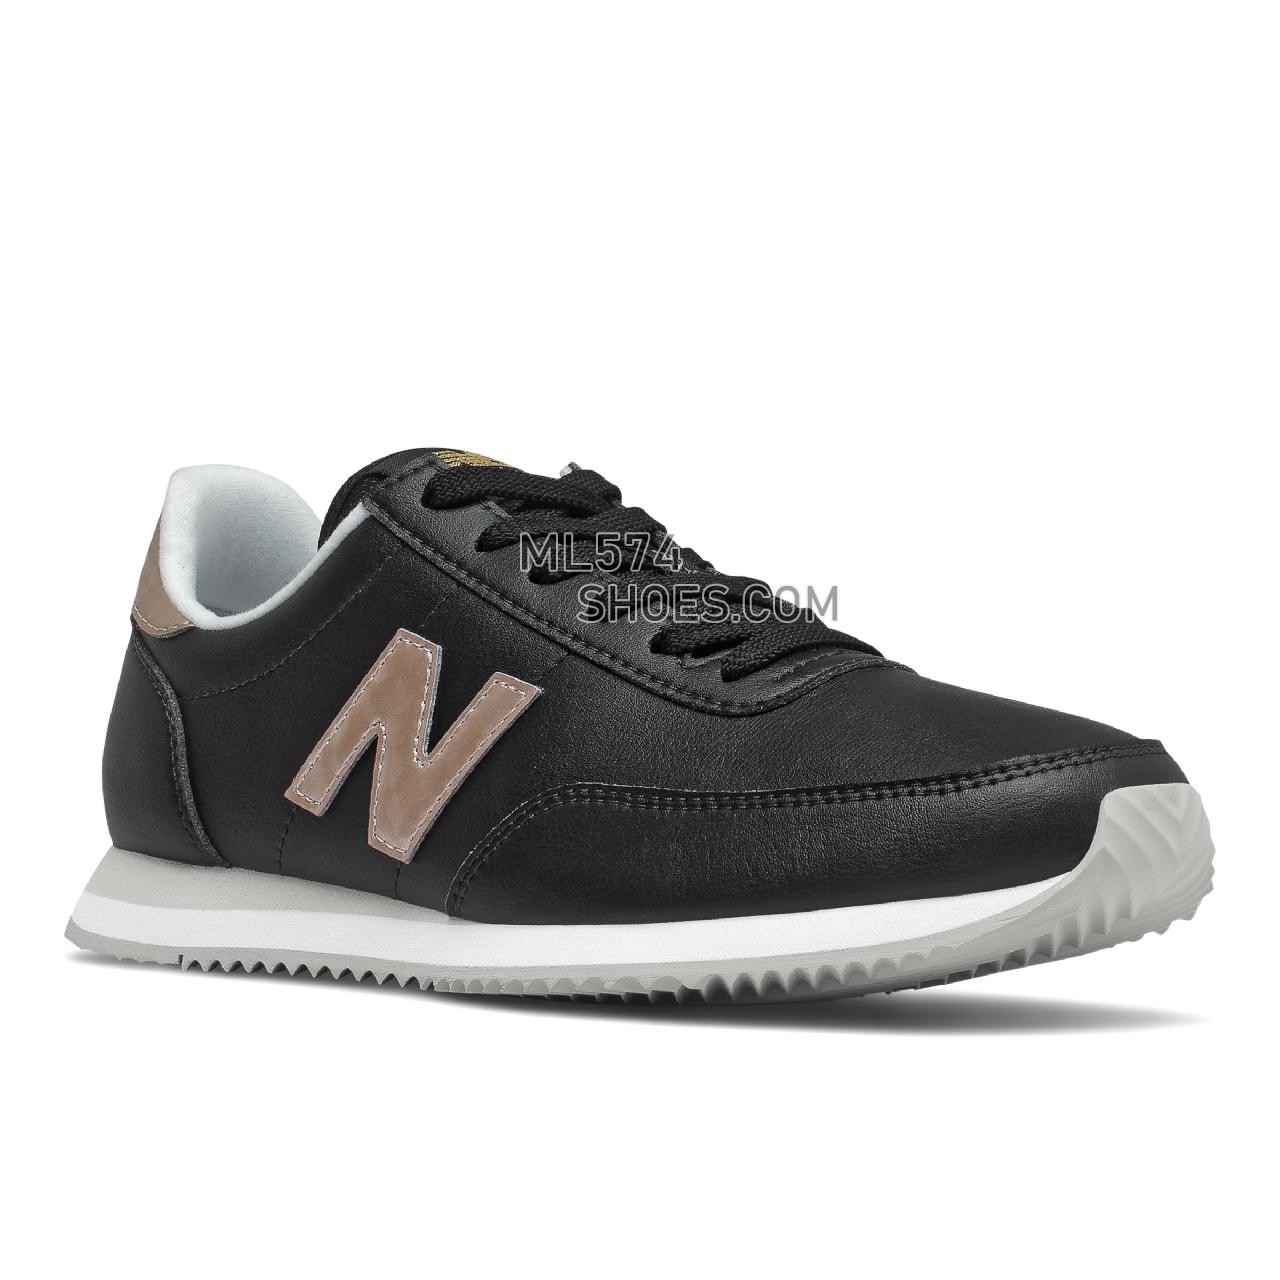 New Balance 720 - Women's Classic Sneakers - Black with Gold - WL720MC1